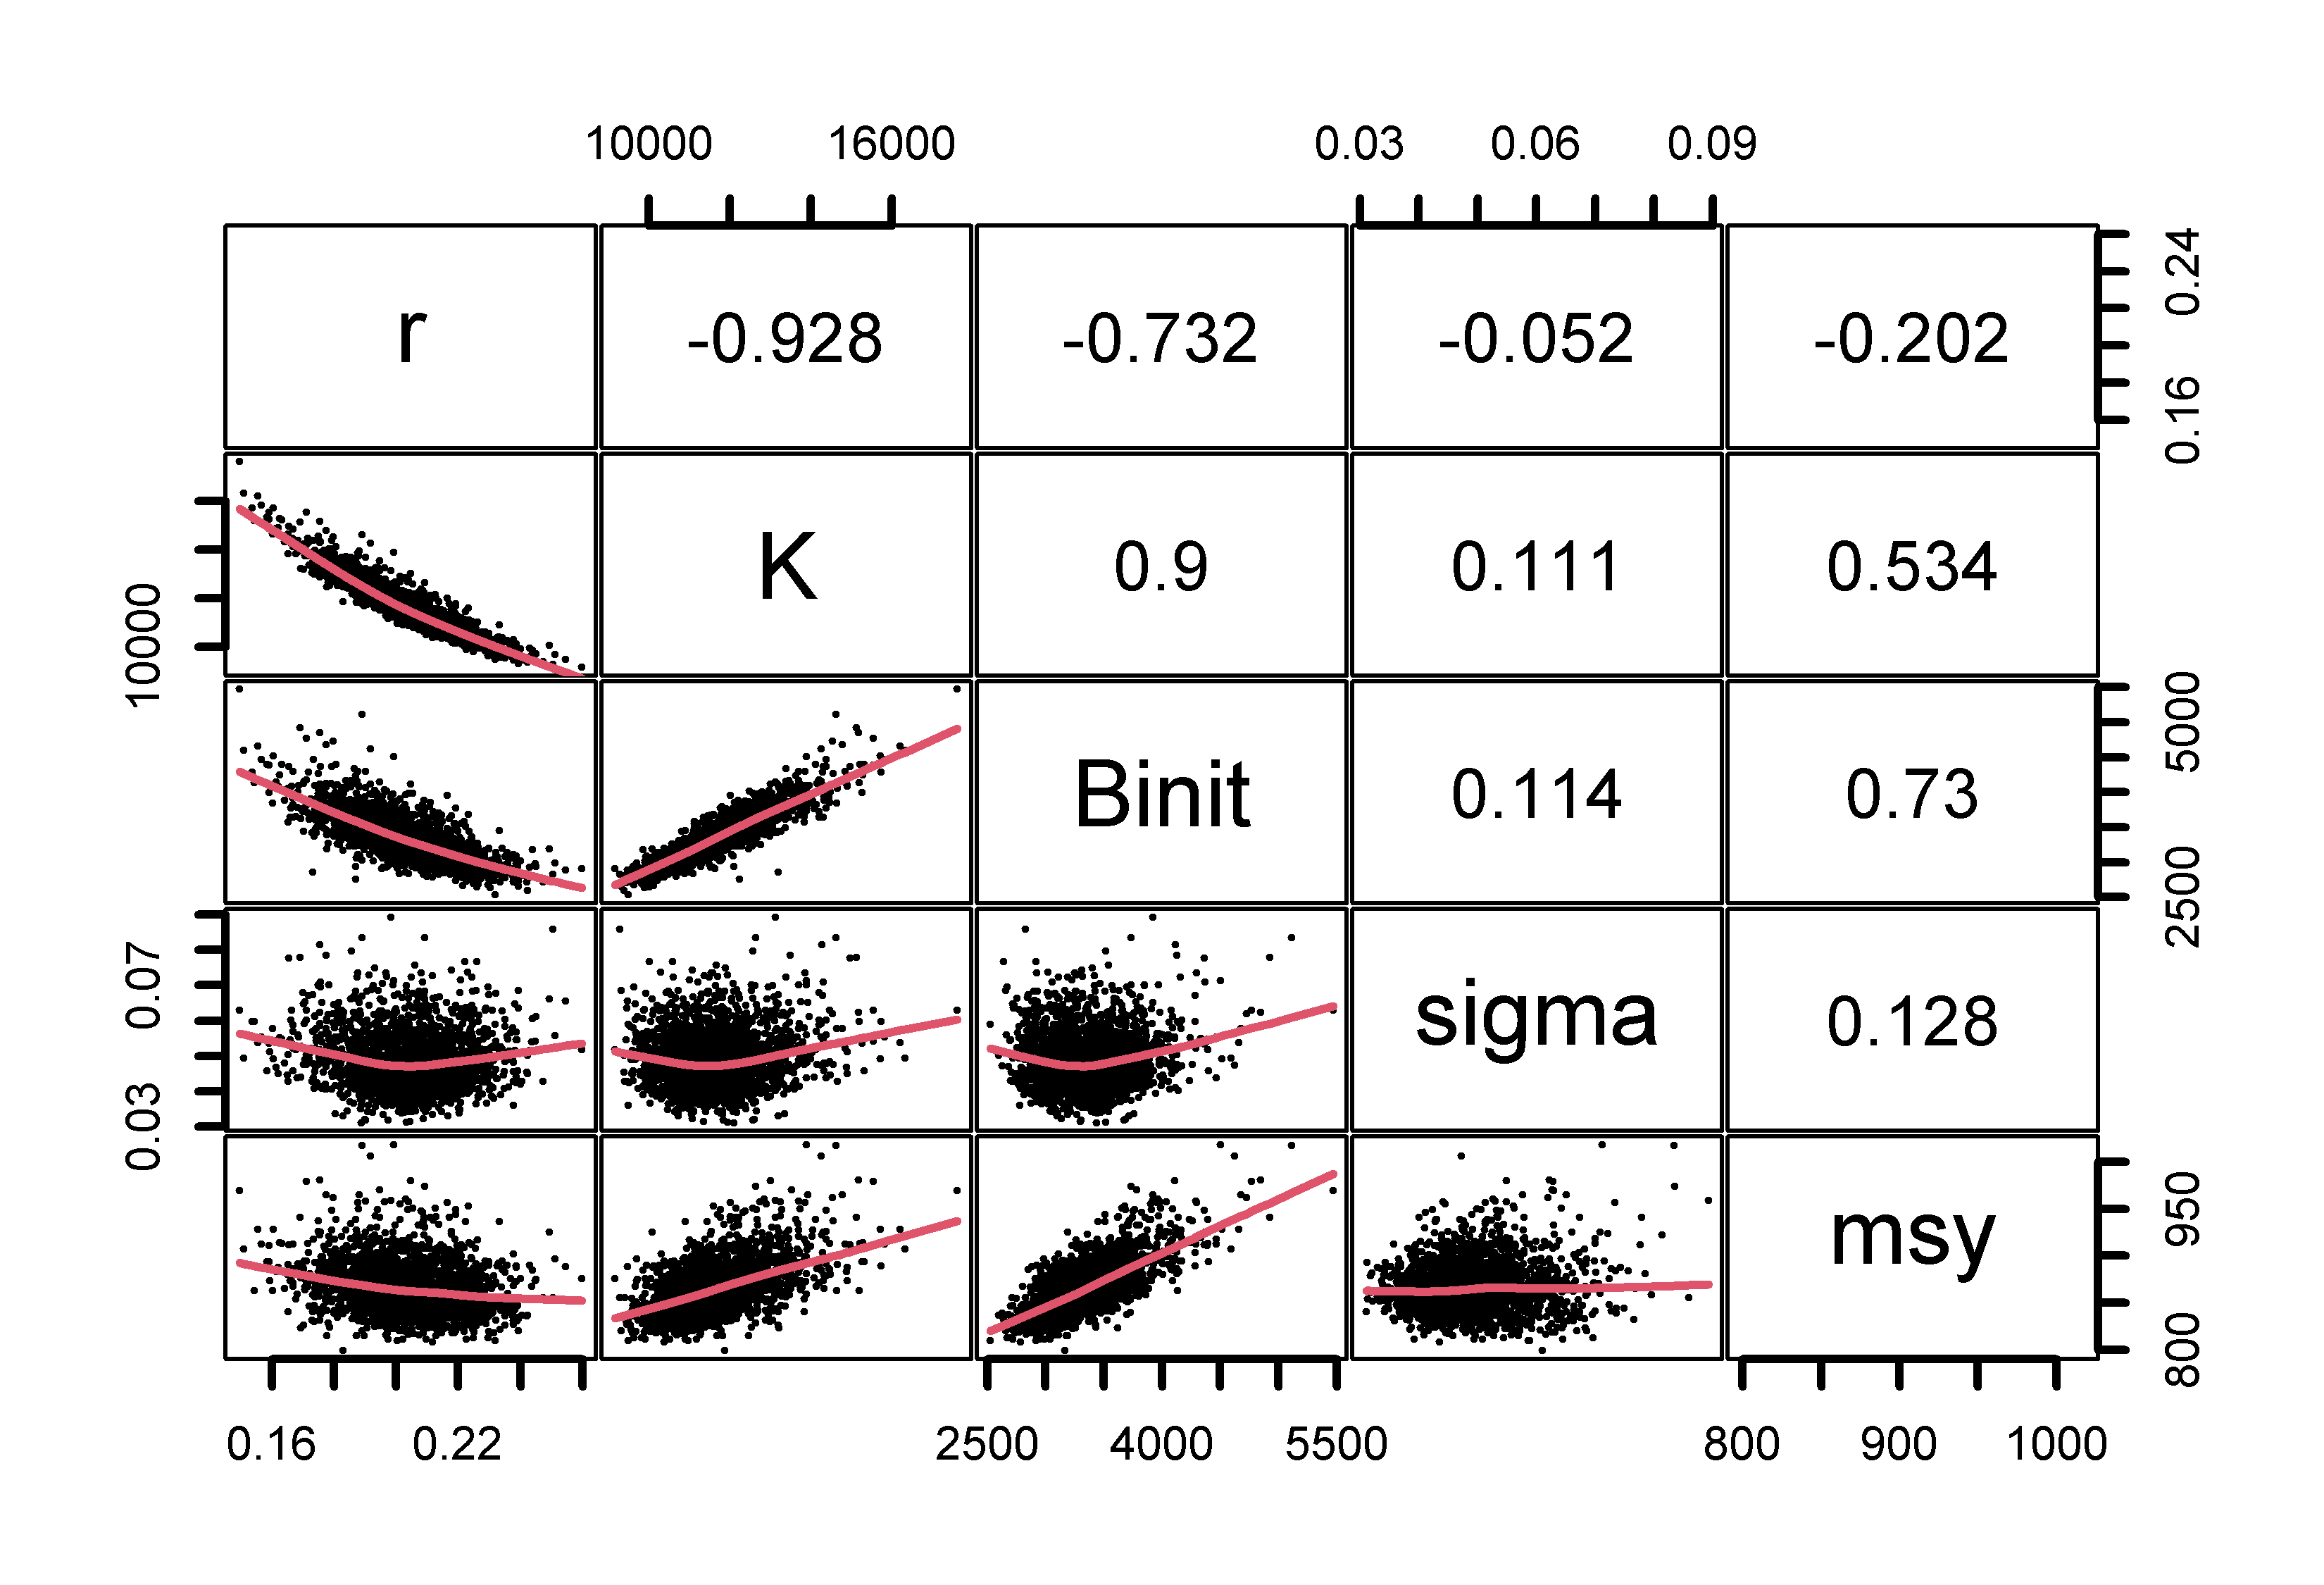 MCMC output as paired scattergrams. The solid lines are loess smoothers indicating trends and the numbers in the upper half are the correlation coefficients between the pairs. Strong correlations are indicated between r, K, and Binit, and between K, Binit, and MSY, with only minor or no relationships between sigma the other parameters or between msy and r.